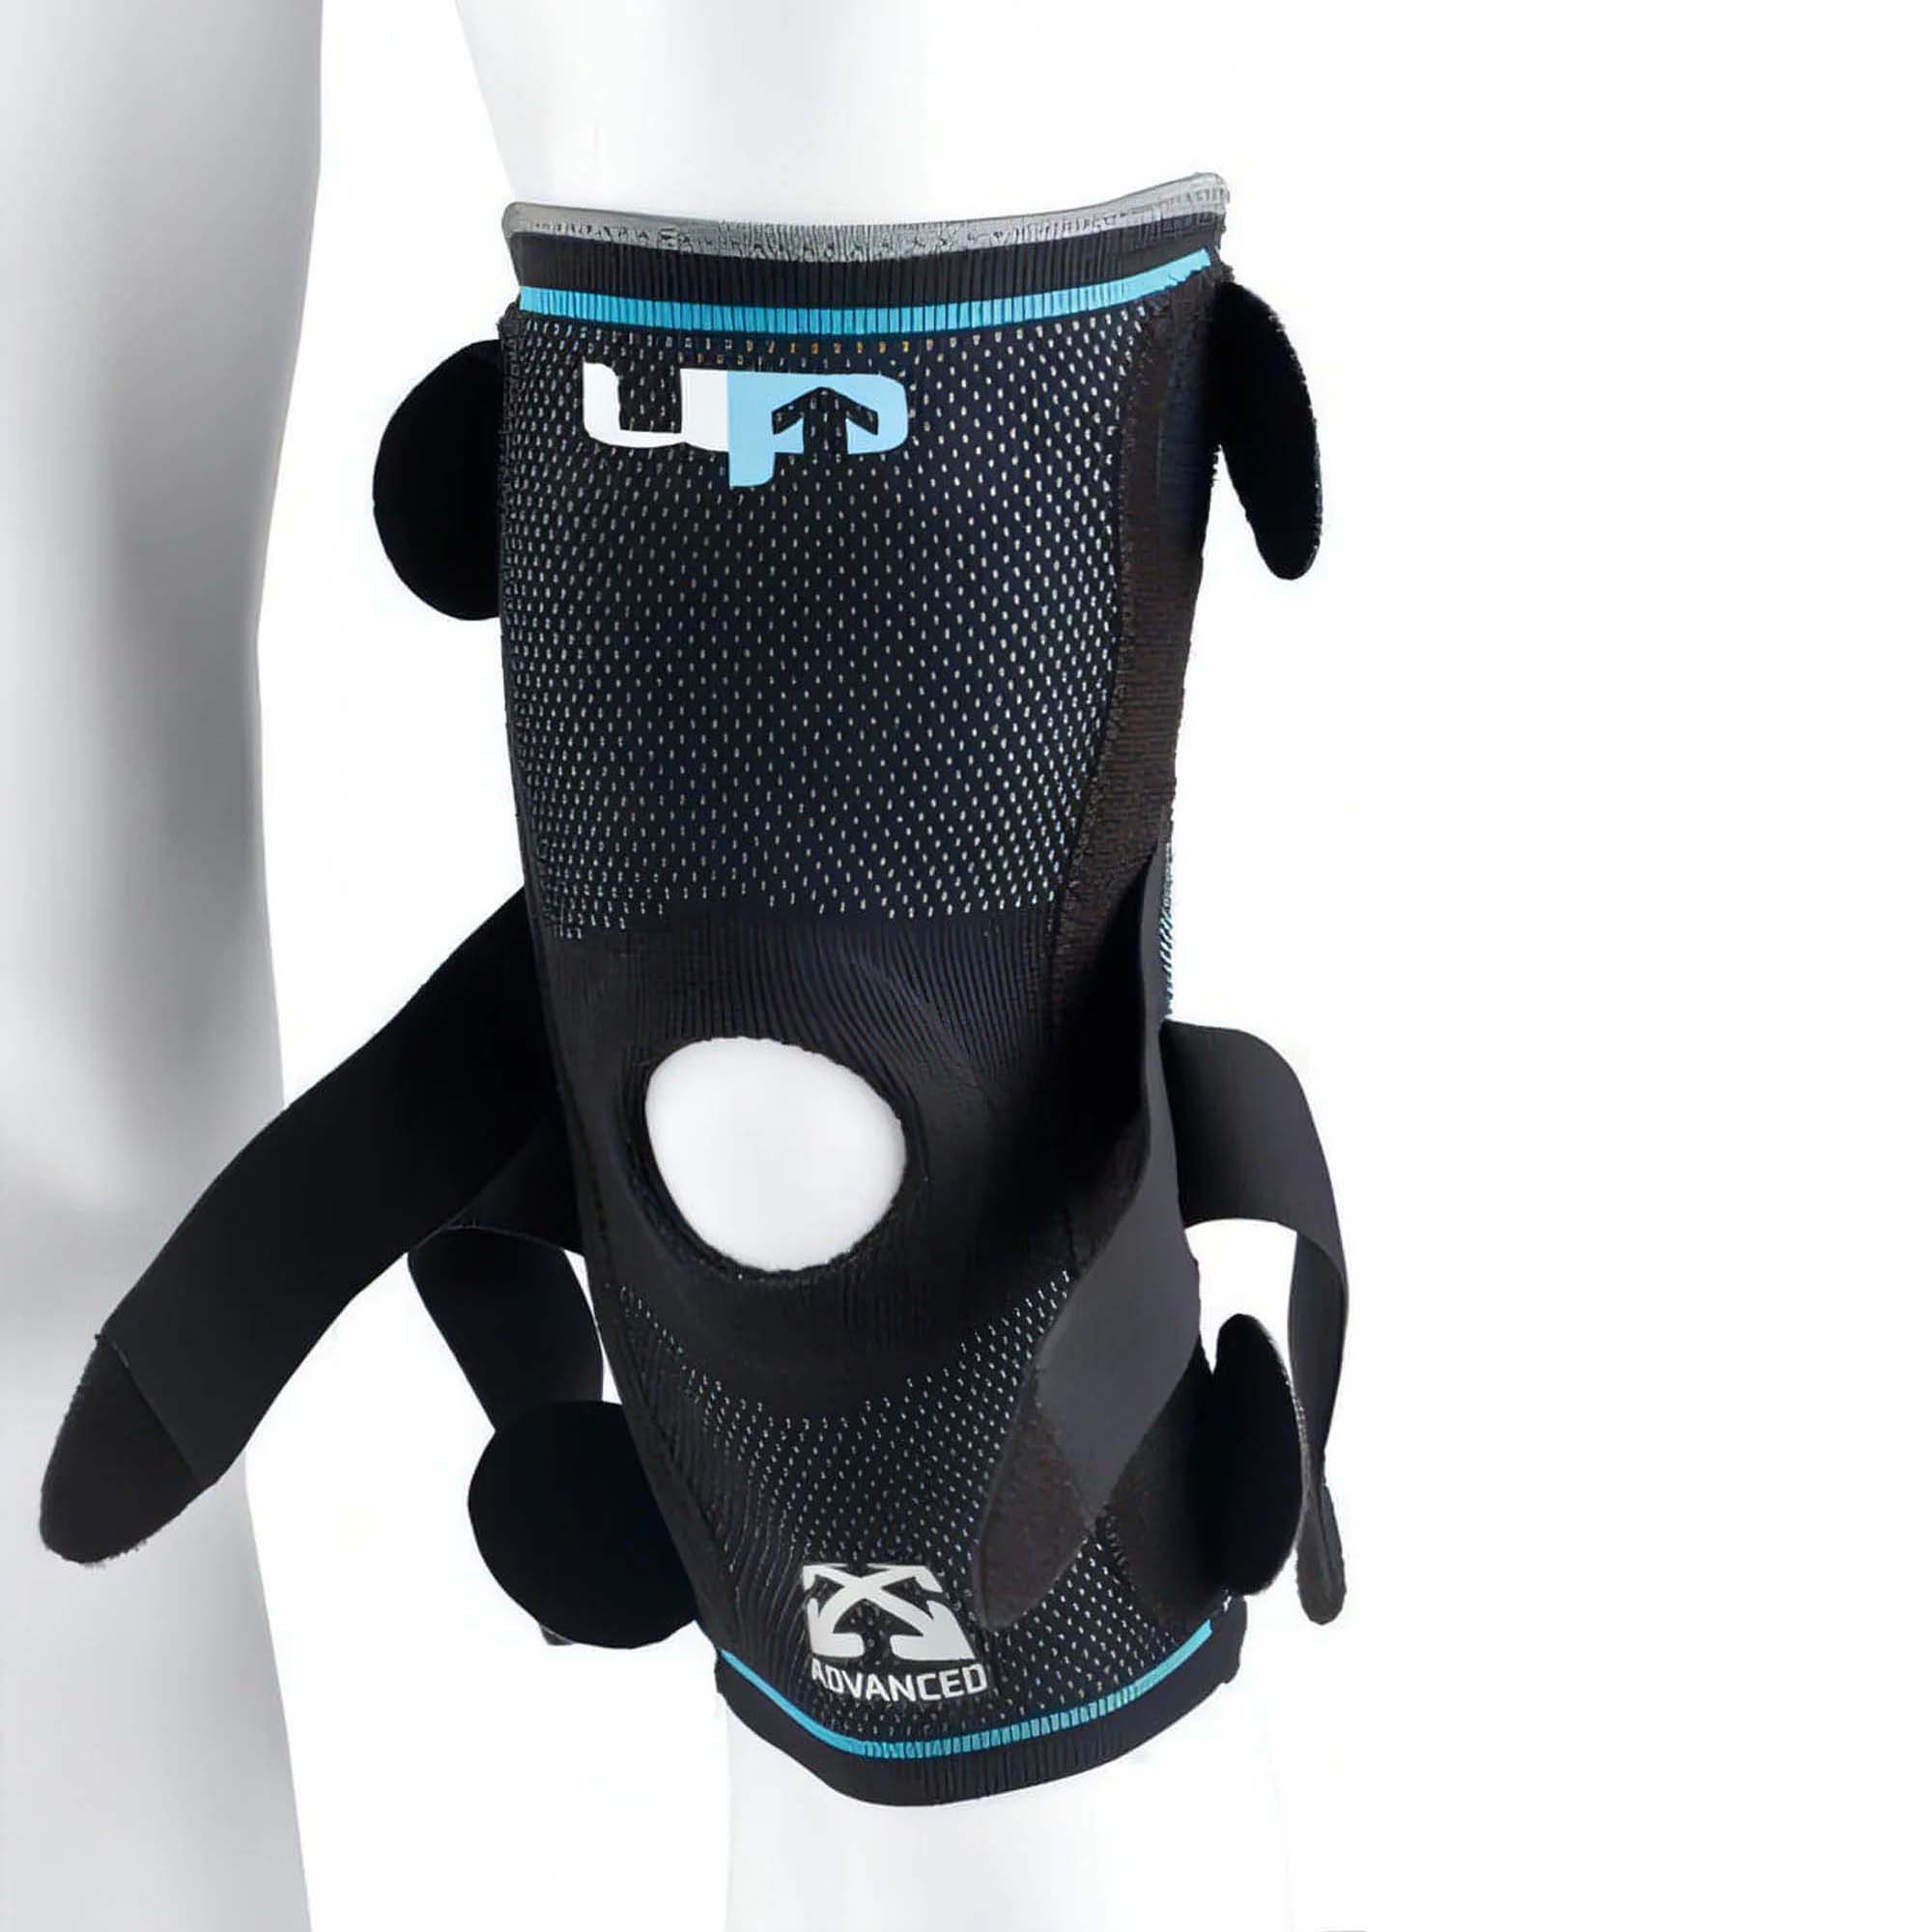 Ultimate Performance Advanced Compression Knee Support